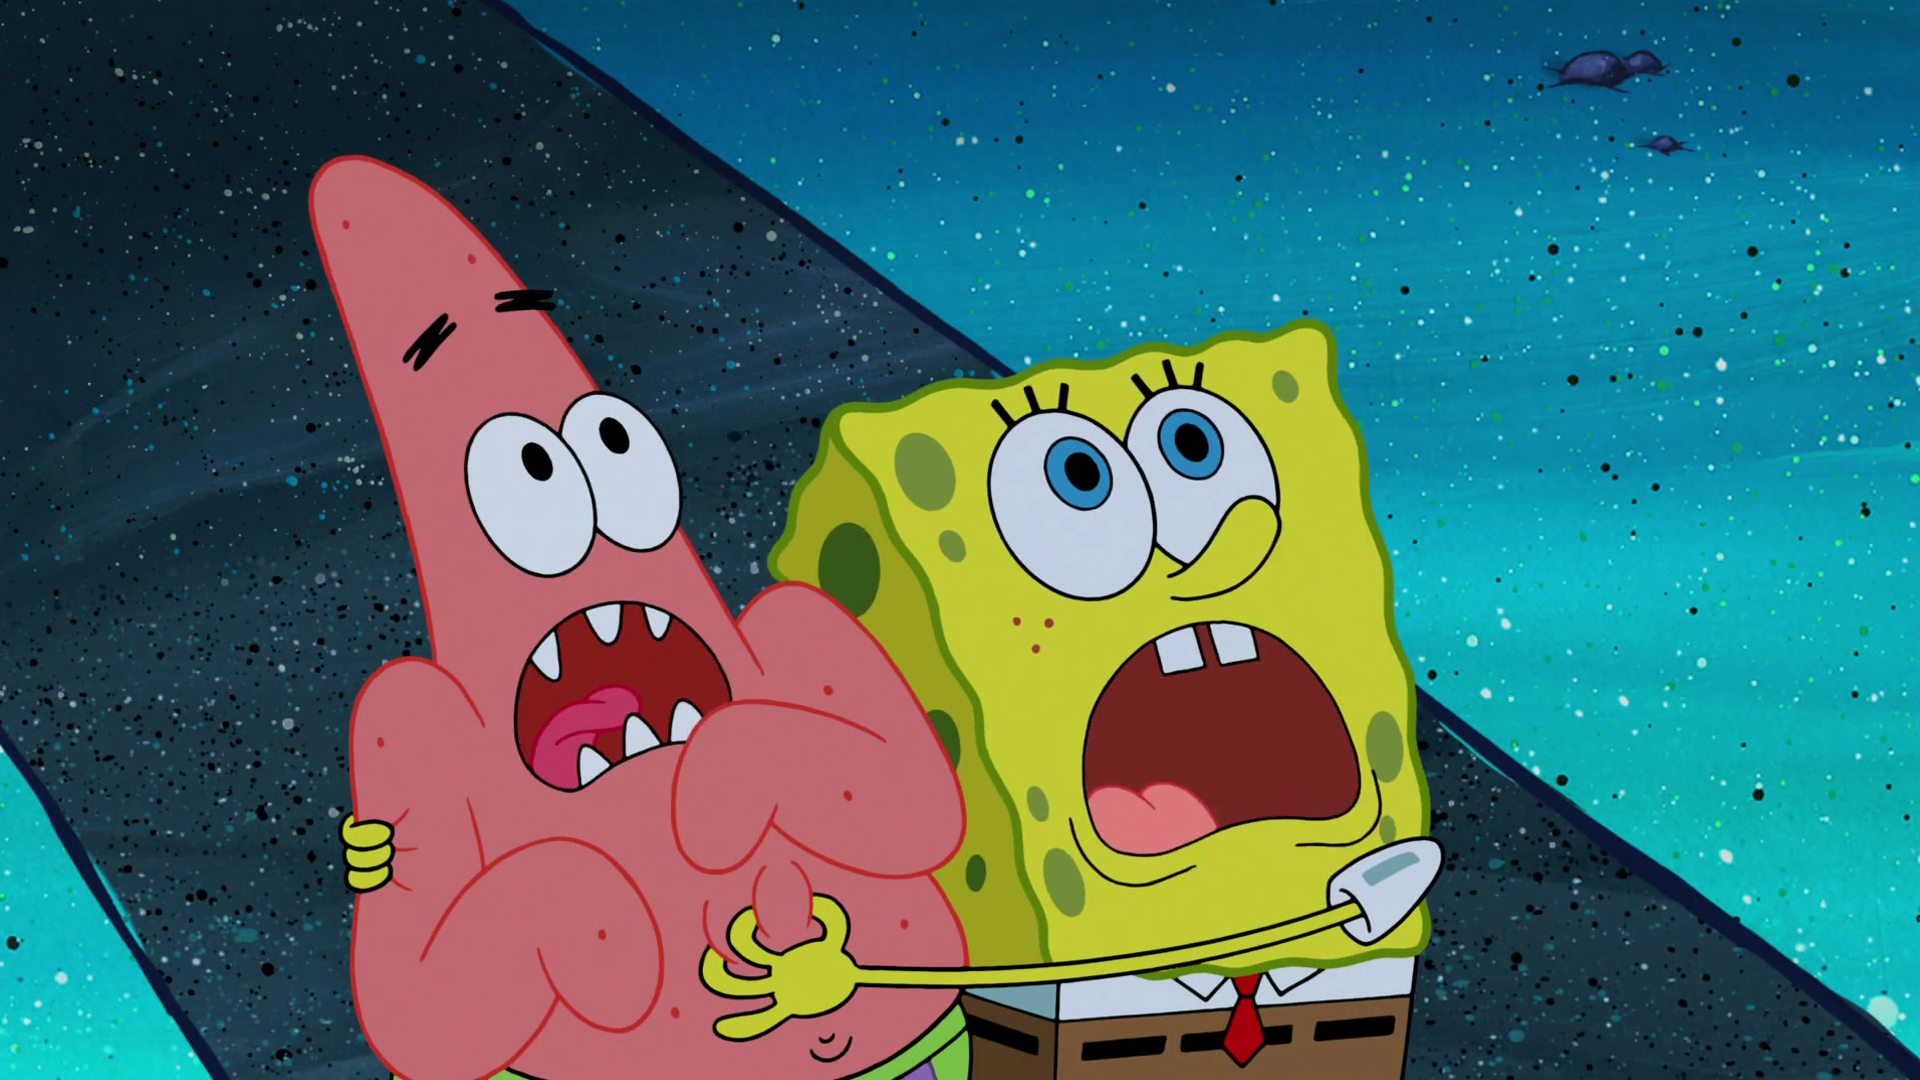 Image - Spongebob and patrick so scared.png The Parody. author profile. 